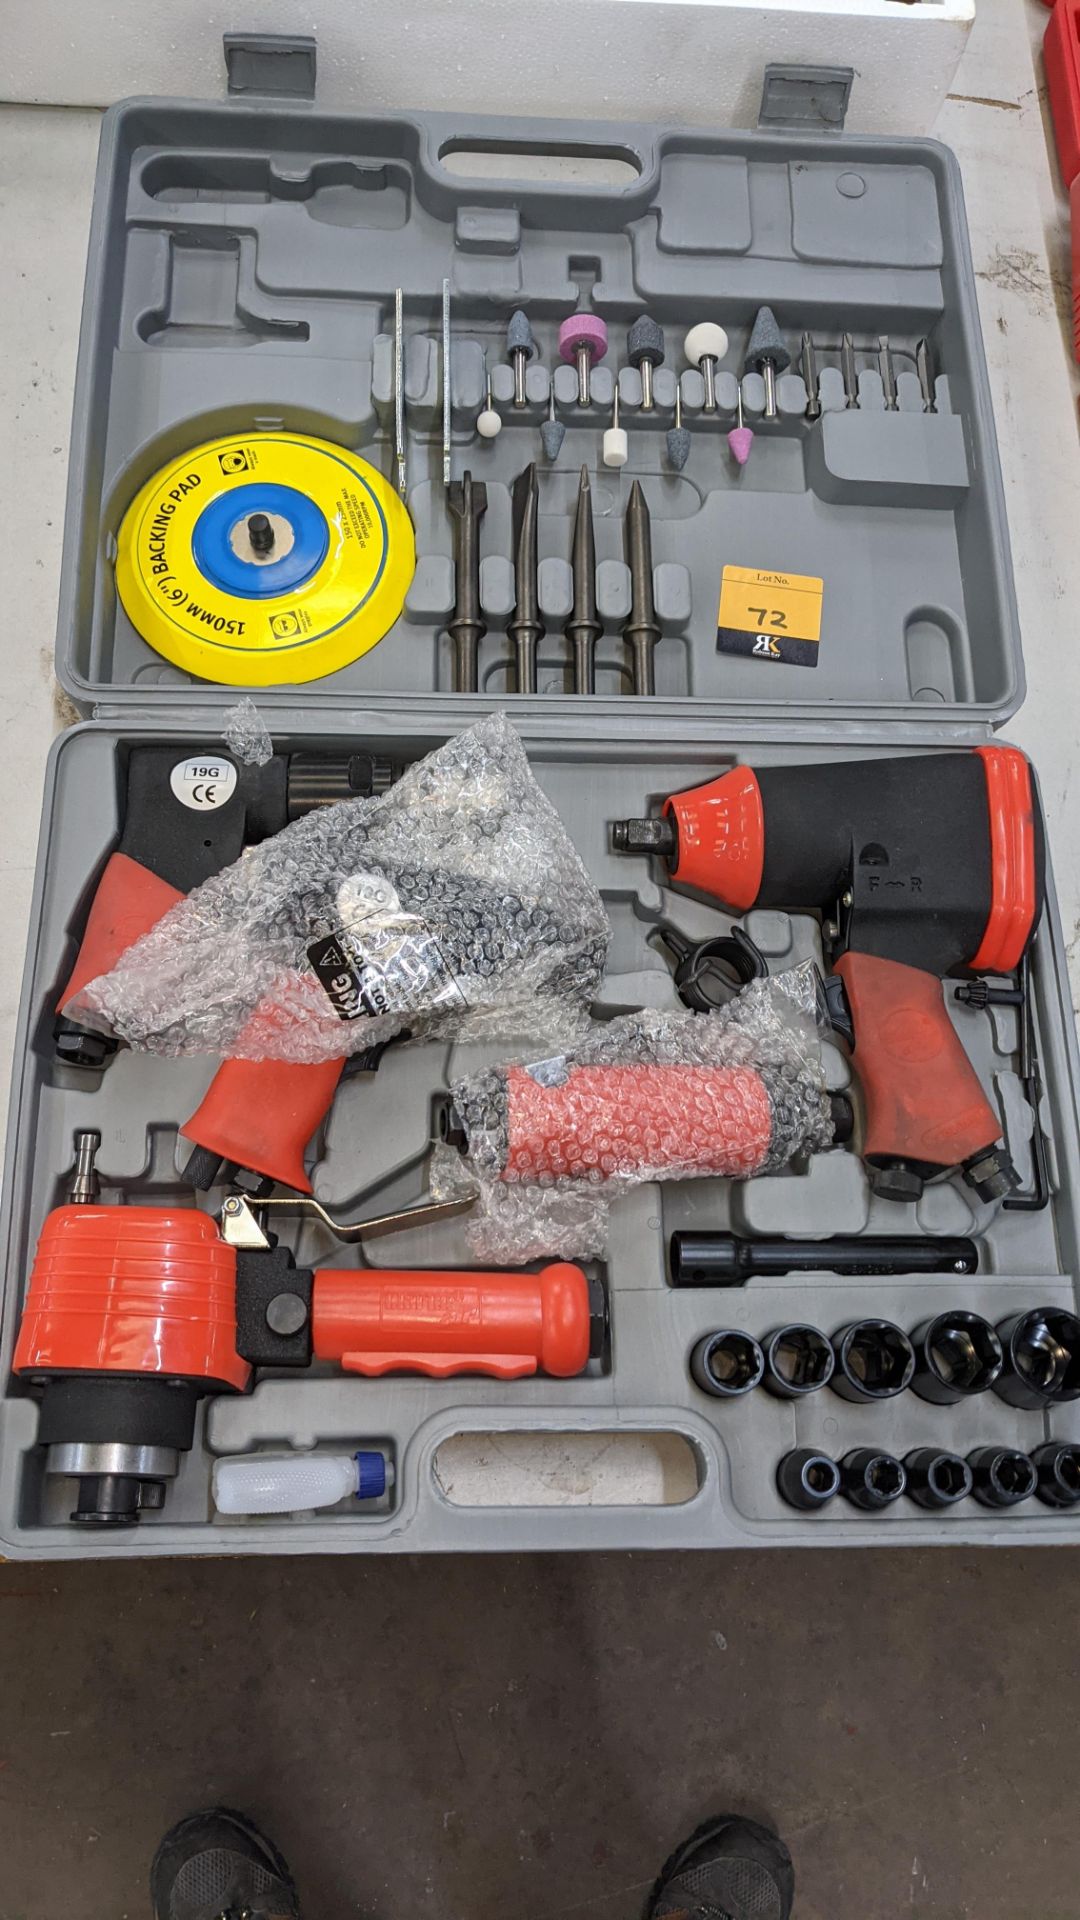 Clarke air tool set in case comprising 1/2" square drive impact wrench, air hammer, 3/8" air drill,